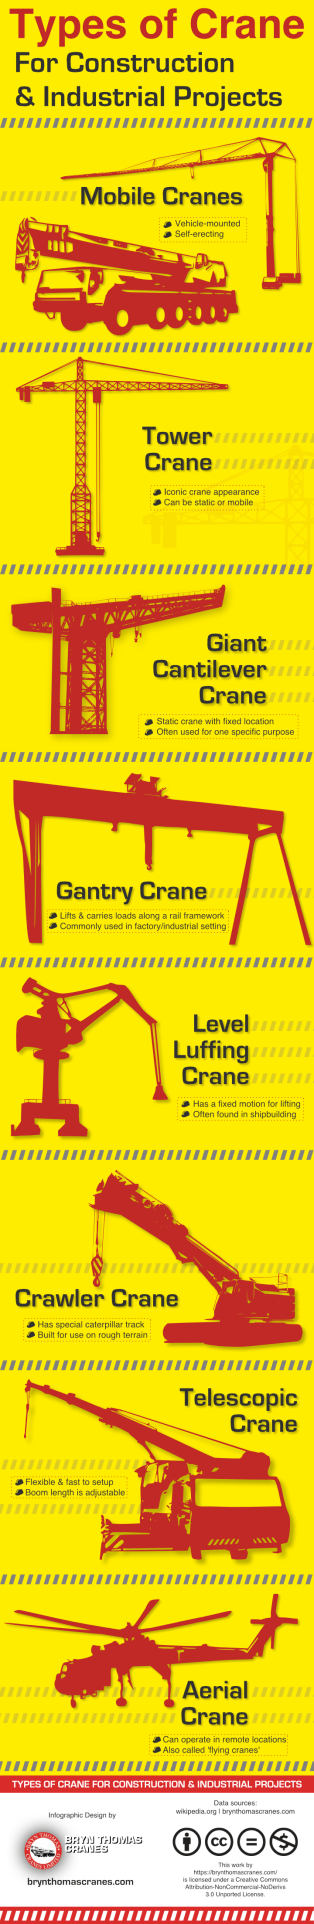 Types of Crane For Construction & Industrial Projects